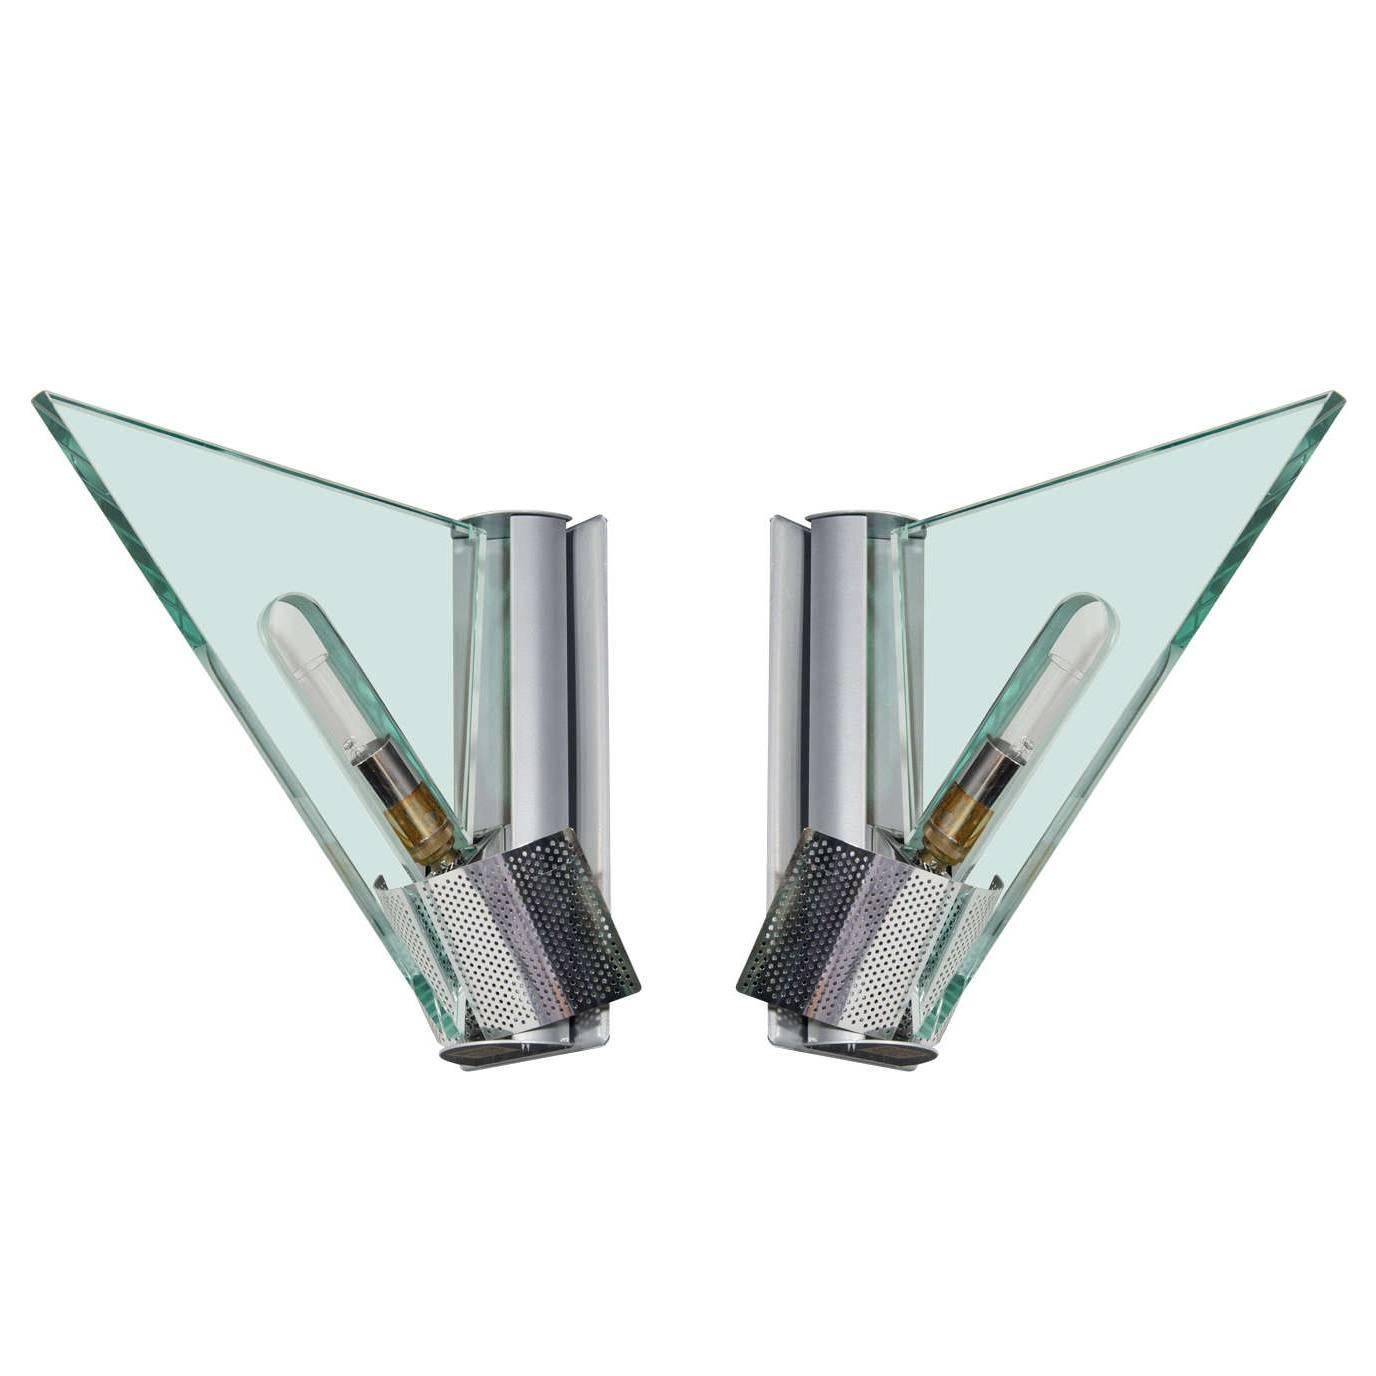 Pair of Italian Modern Sconces by Carlo Forcolini for Artemide